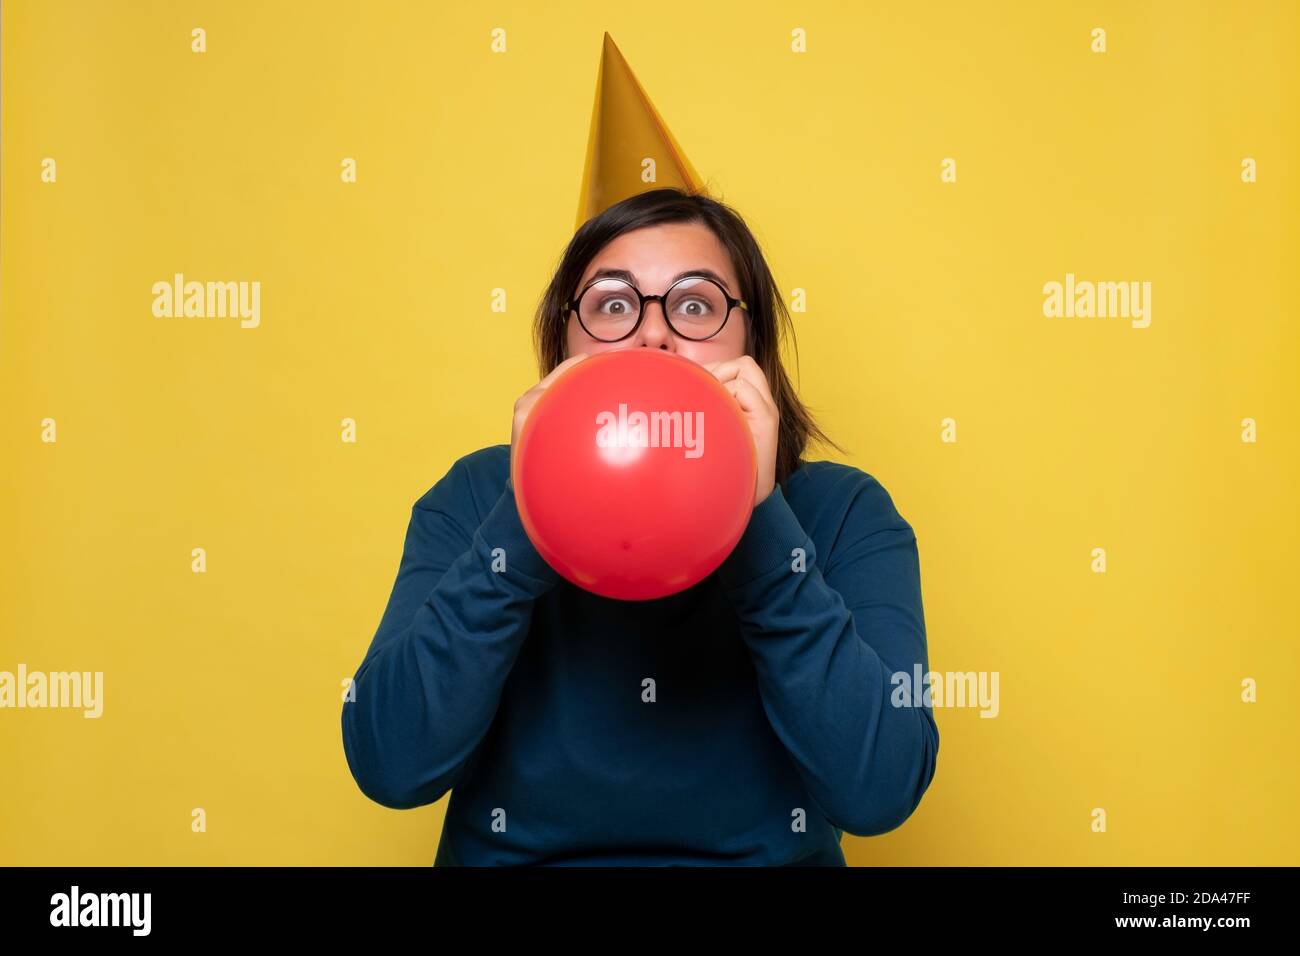 Caucasian woman in party hat blowing up red balloon Stock Photo